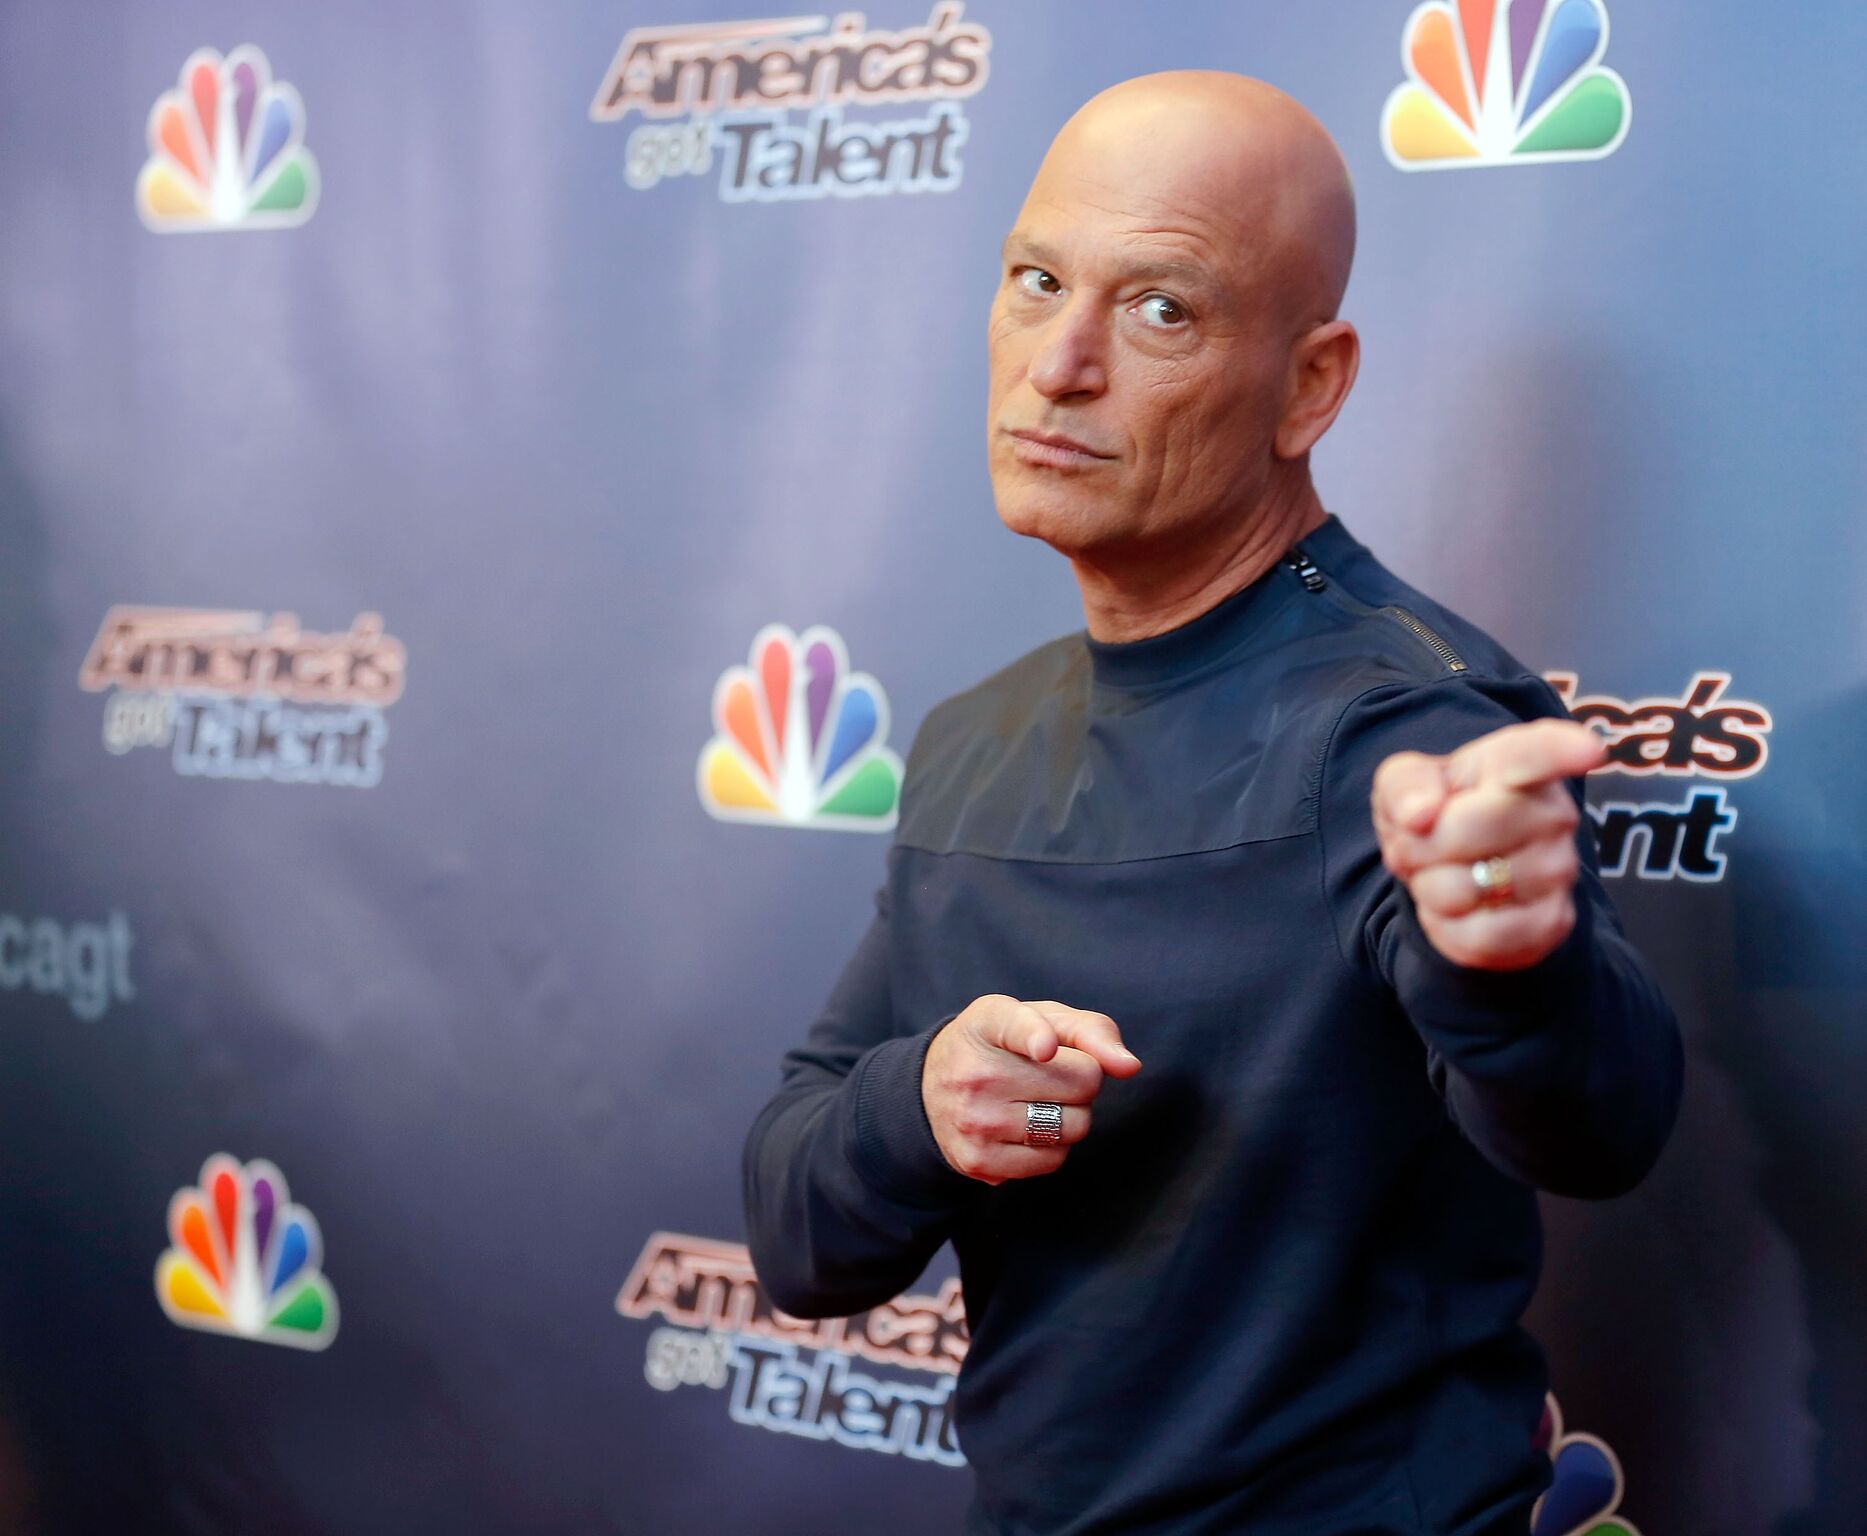 Howie Mandel attends the "America's Got Talent" red carpet event at Madison Square Garden  | Getty Images